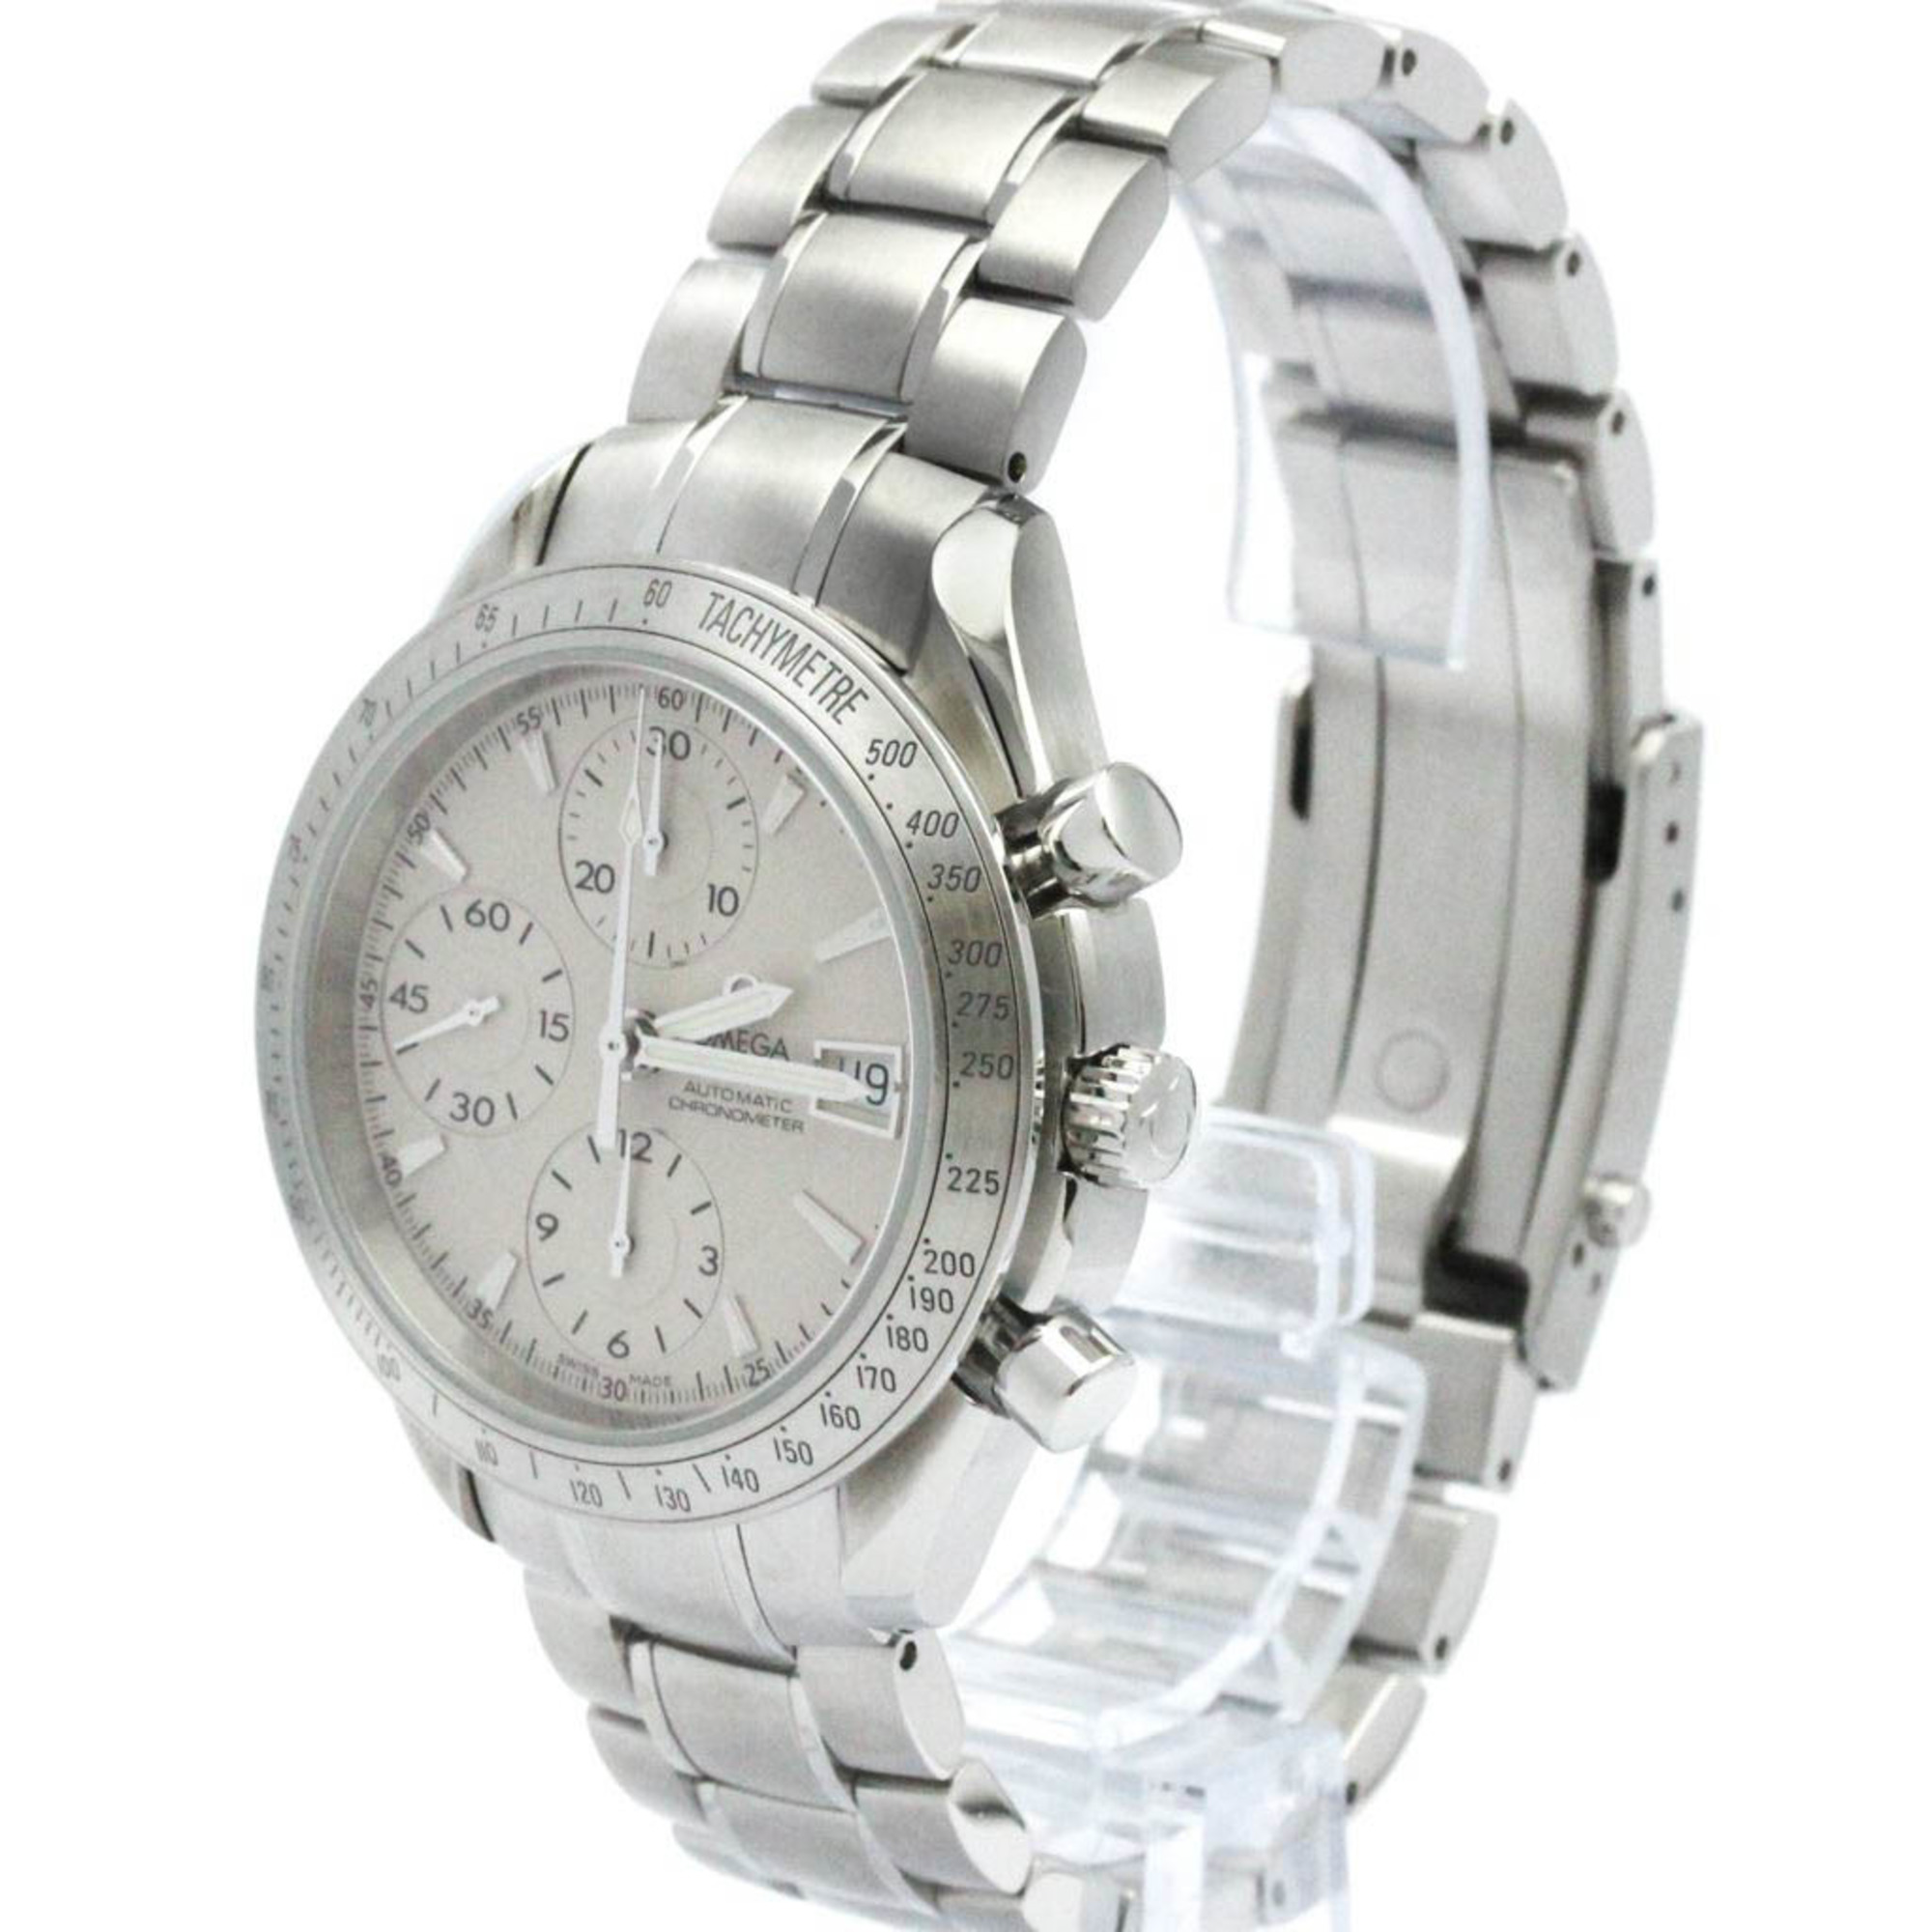 Polished OMEGA Speedmaster Date Steel Automatic Mens Watch 3211.30 BF571697